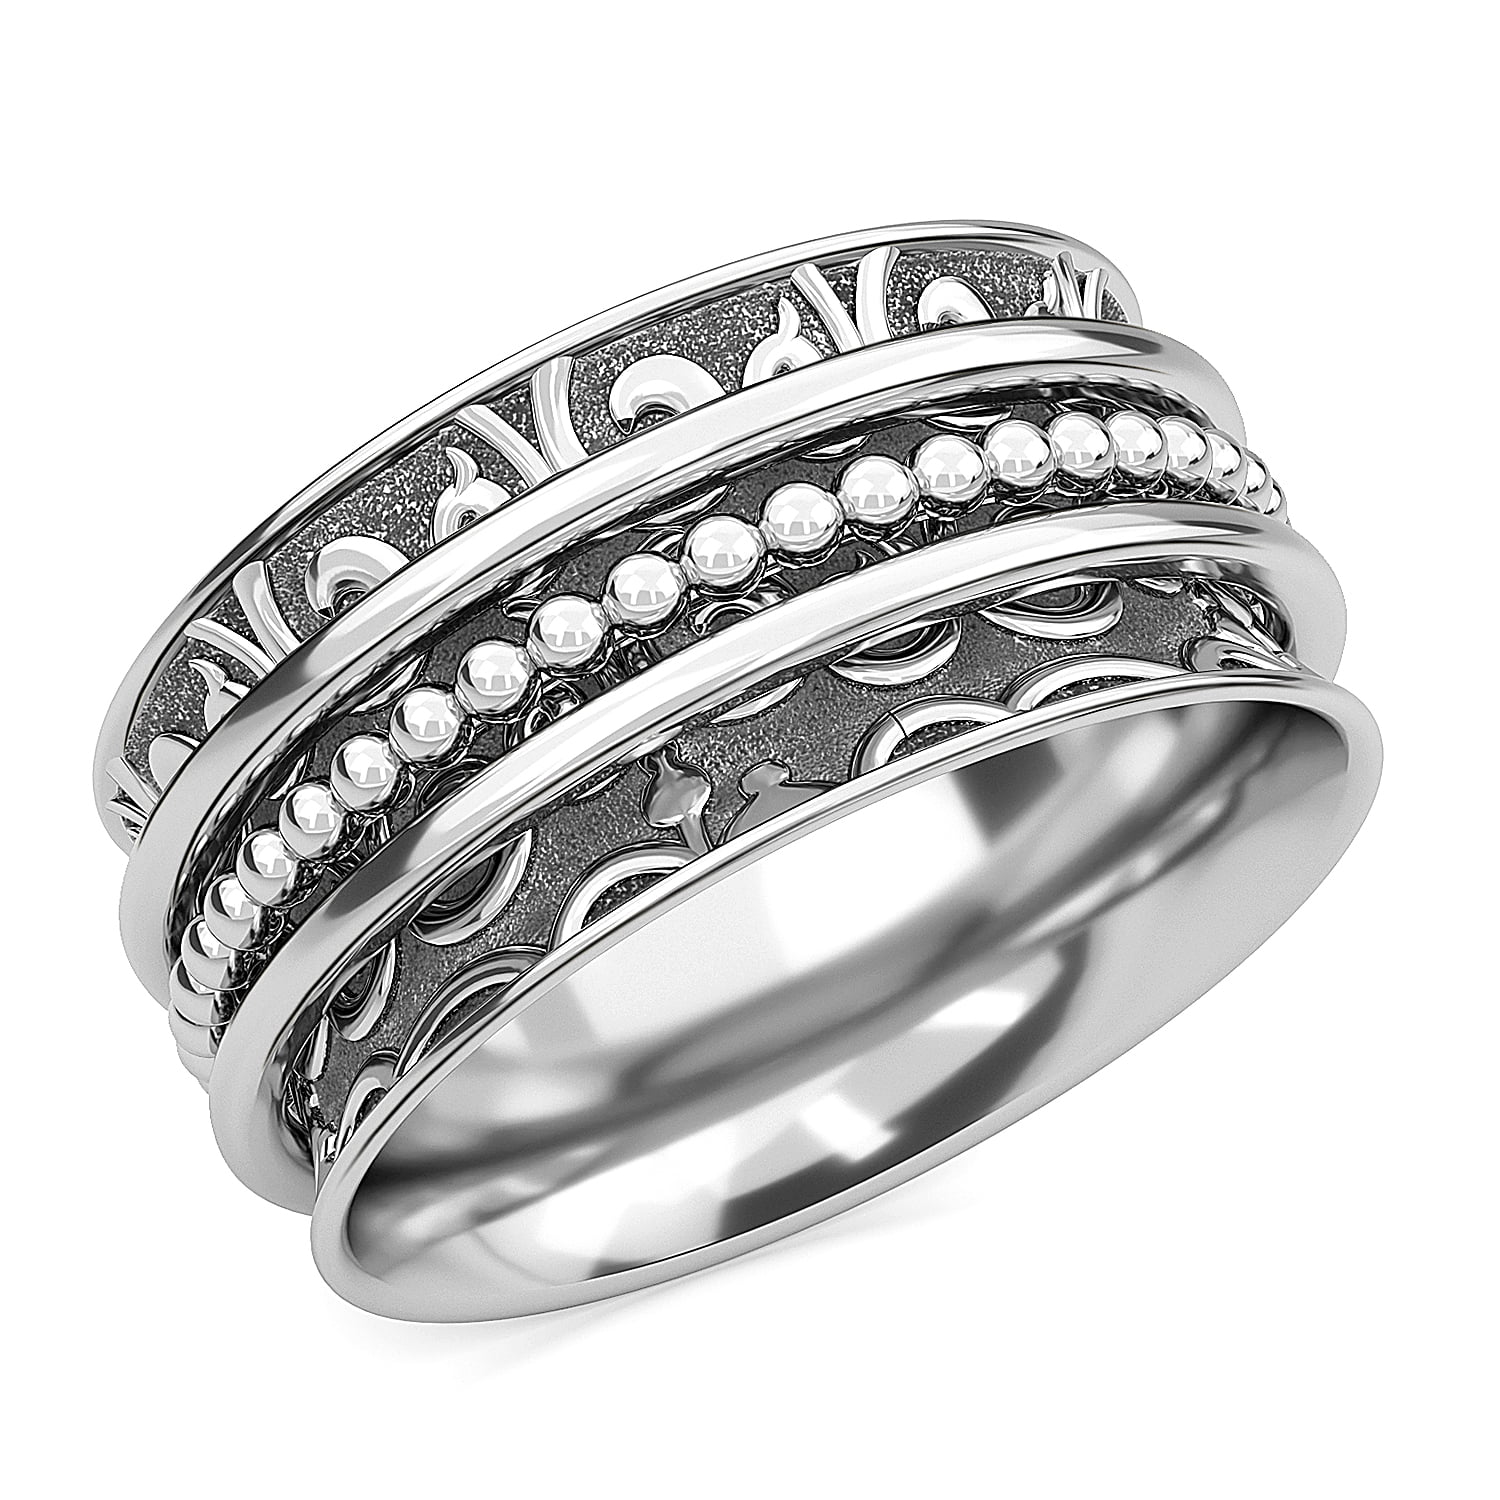 925 Sterling Silver Band Ring Handmade Ring Wide Ring Fidget Ring All Size AM-40 